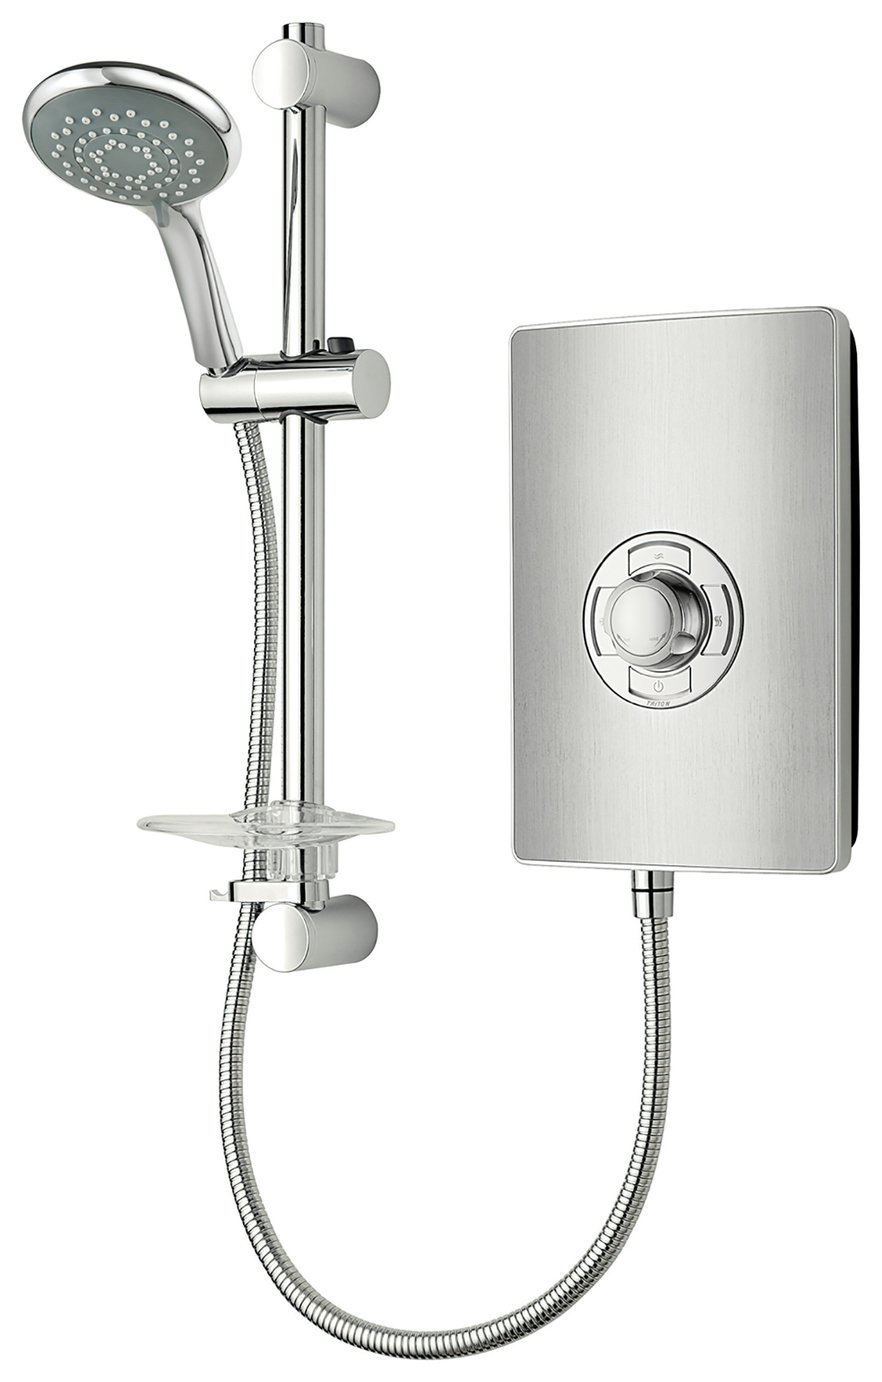 Triton Collection II 8.5kW Brushed Steel Electric Shower